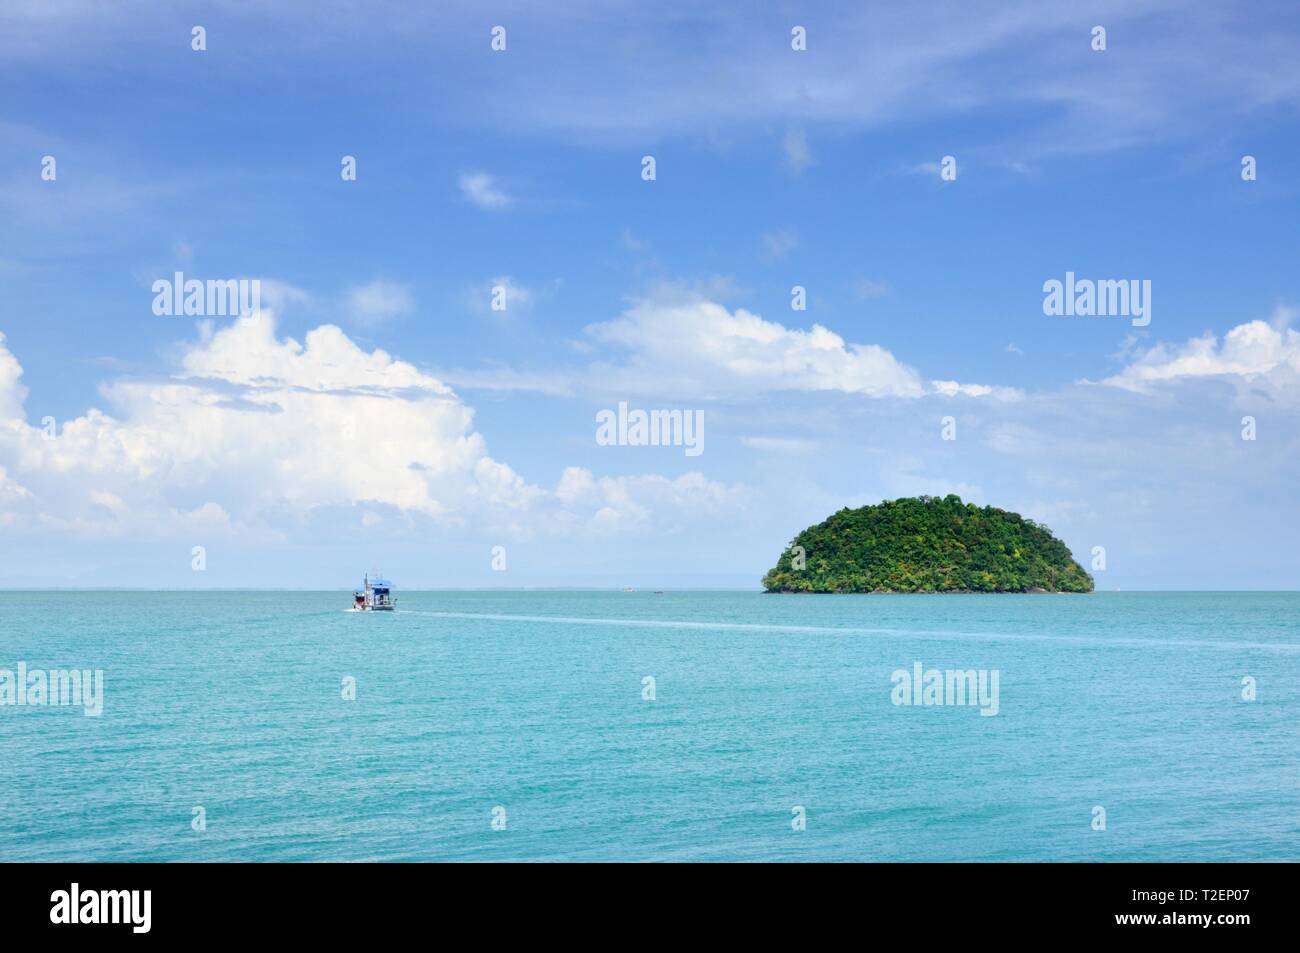 Turquoise tropical sea with fishing boat and small island on horizon under blue sky with scenic clouds at the Koh Chang island, Thailand. Stock Photo